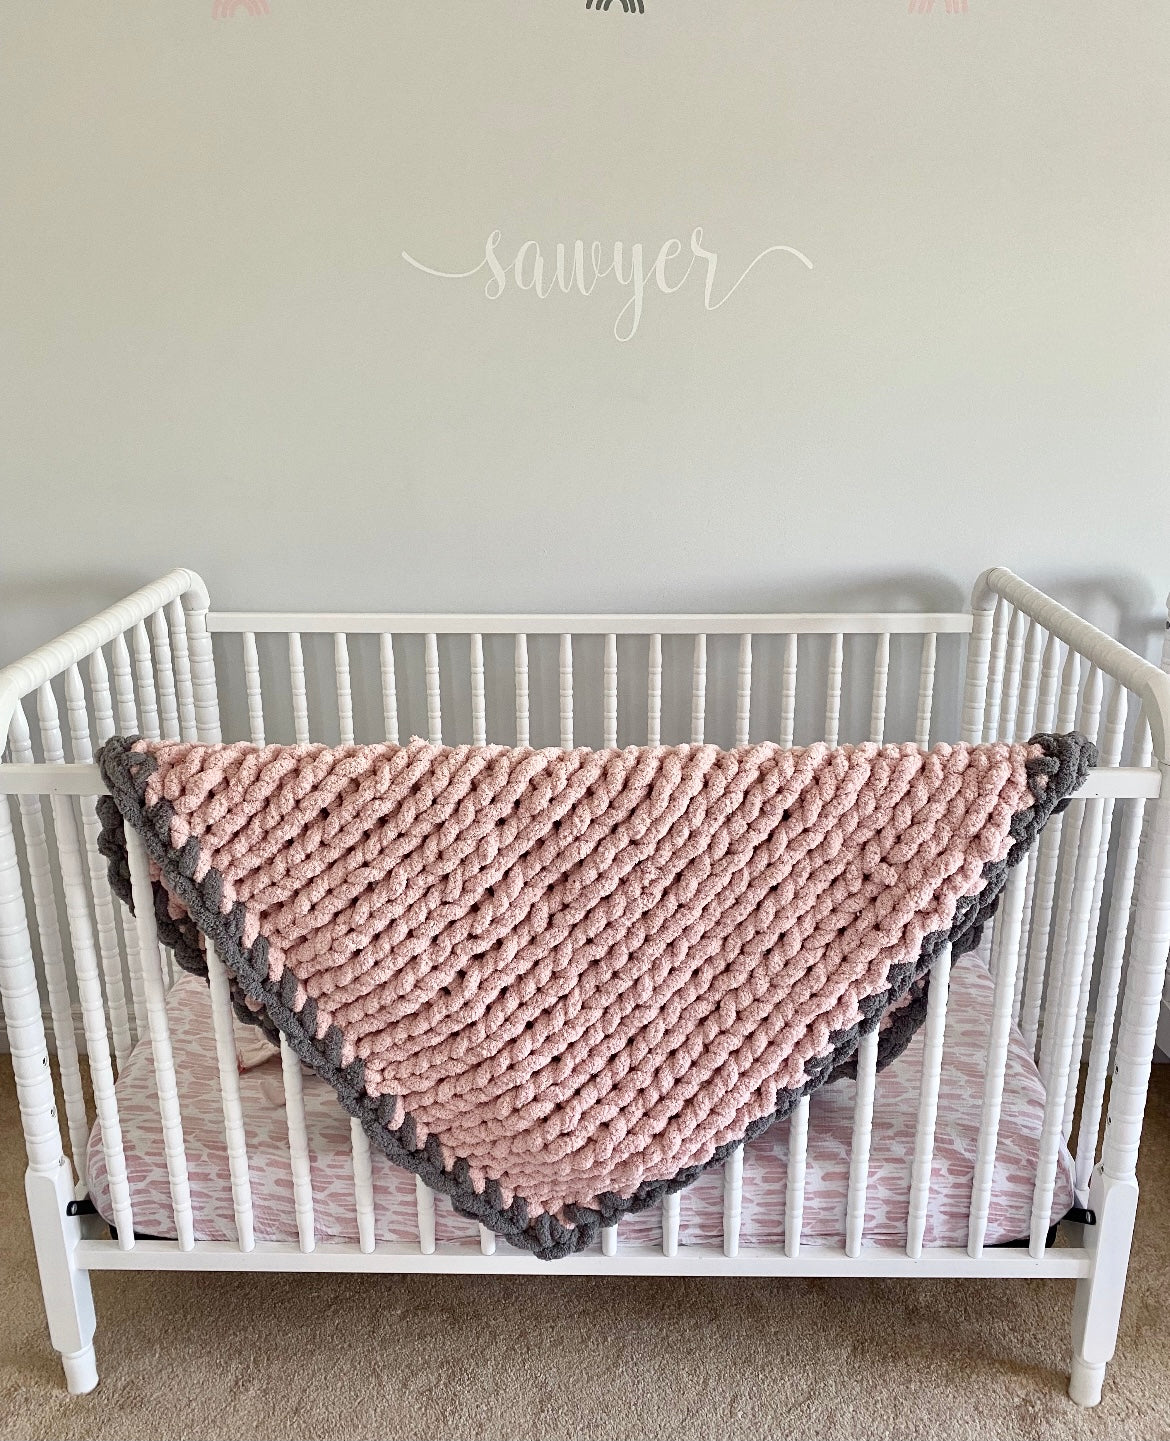 Healing Hand, Chunky Knit Baby Blankets - Light Pink with Dark Grey Edge